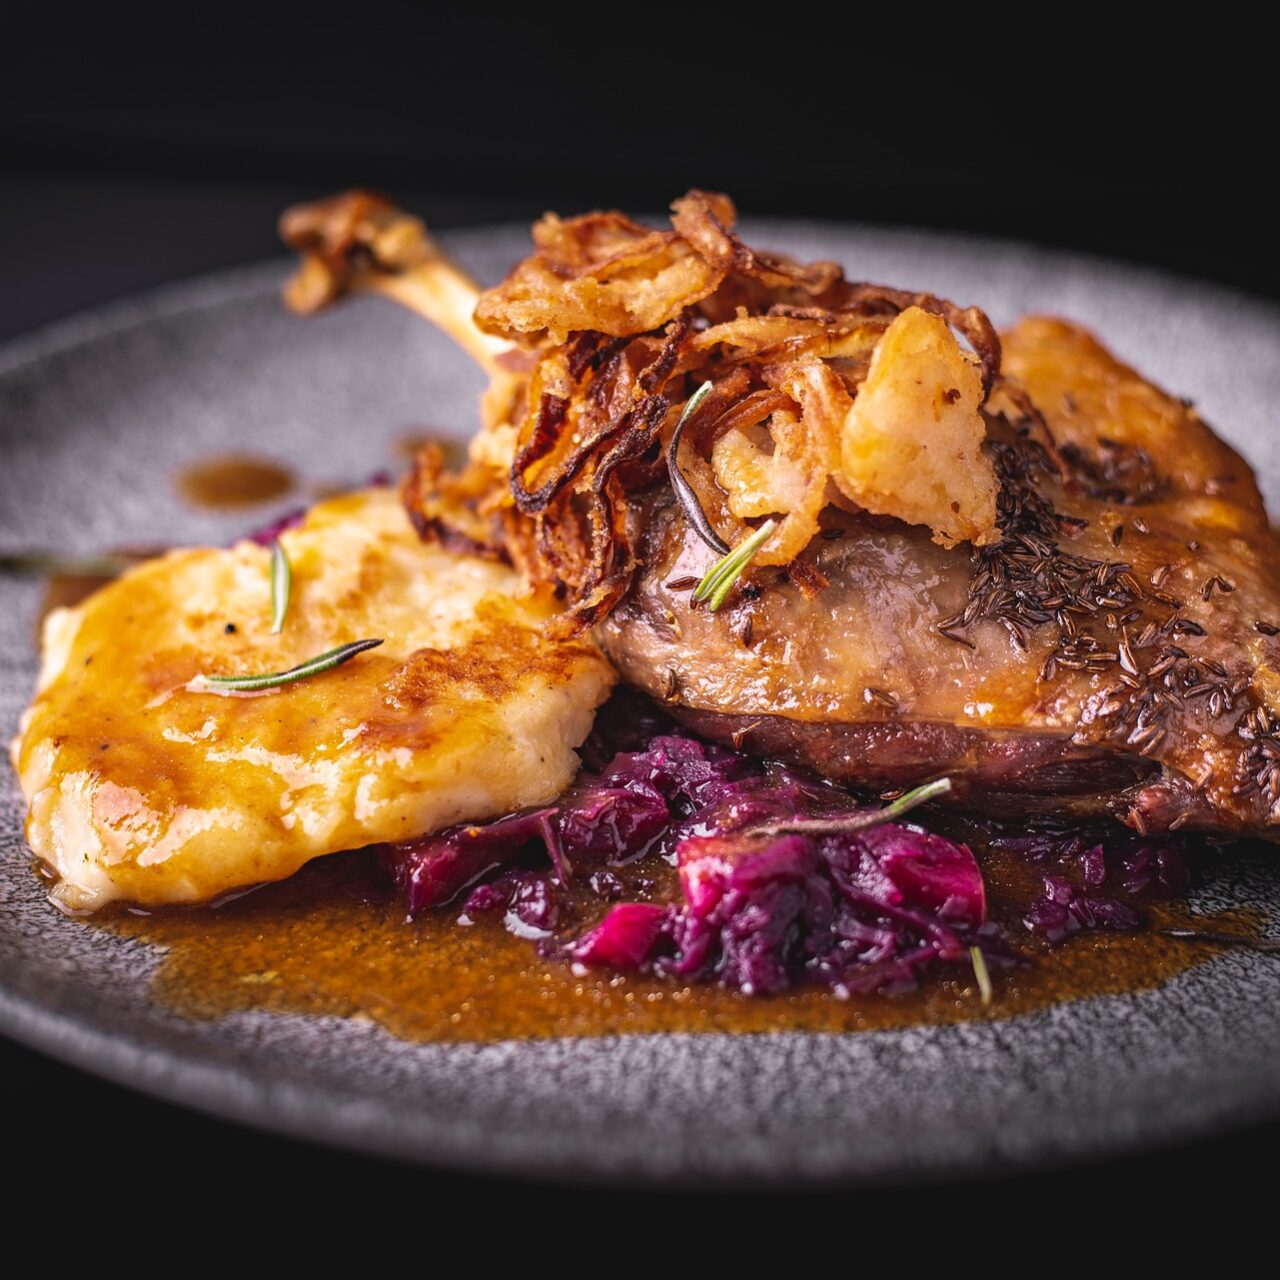 Enjoy delicious Czech food, like goose and red cabbage.